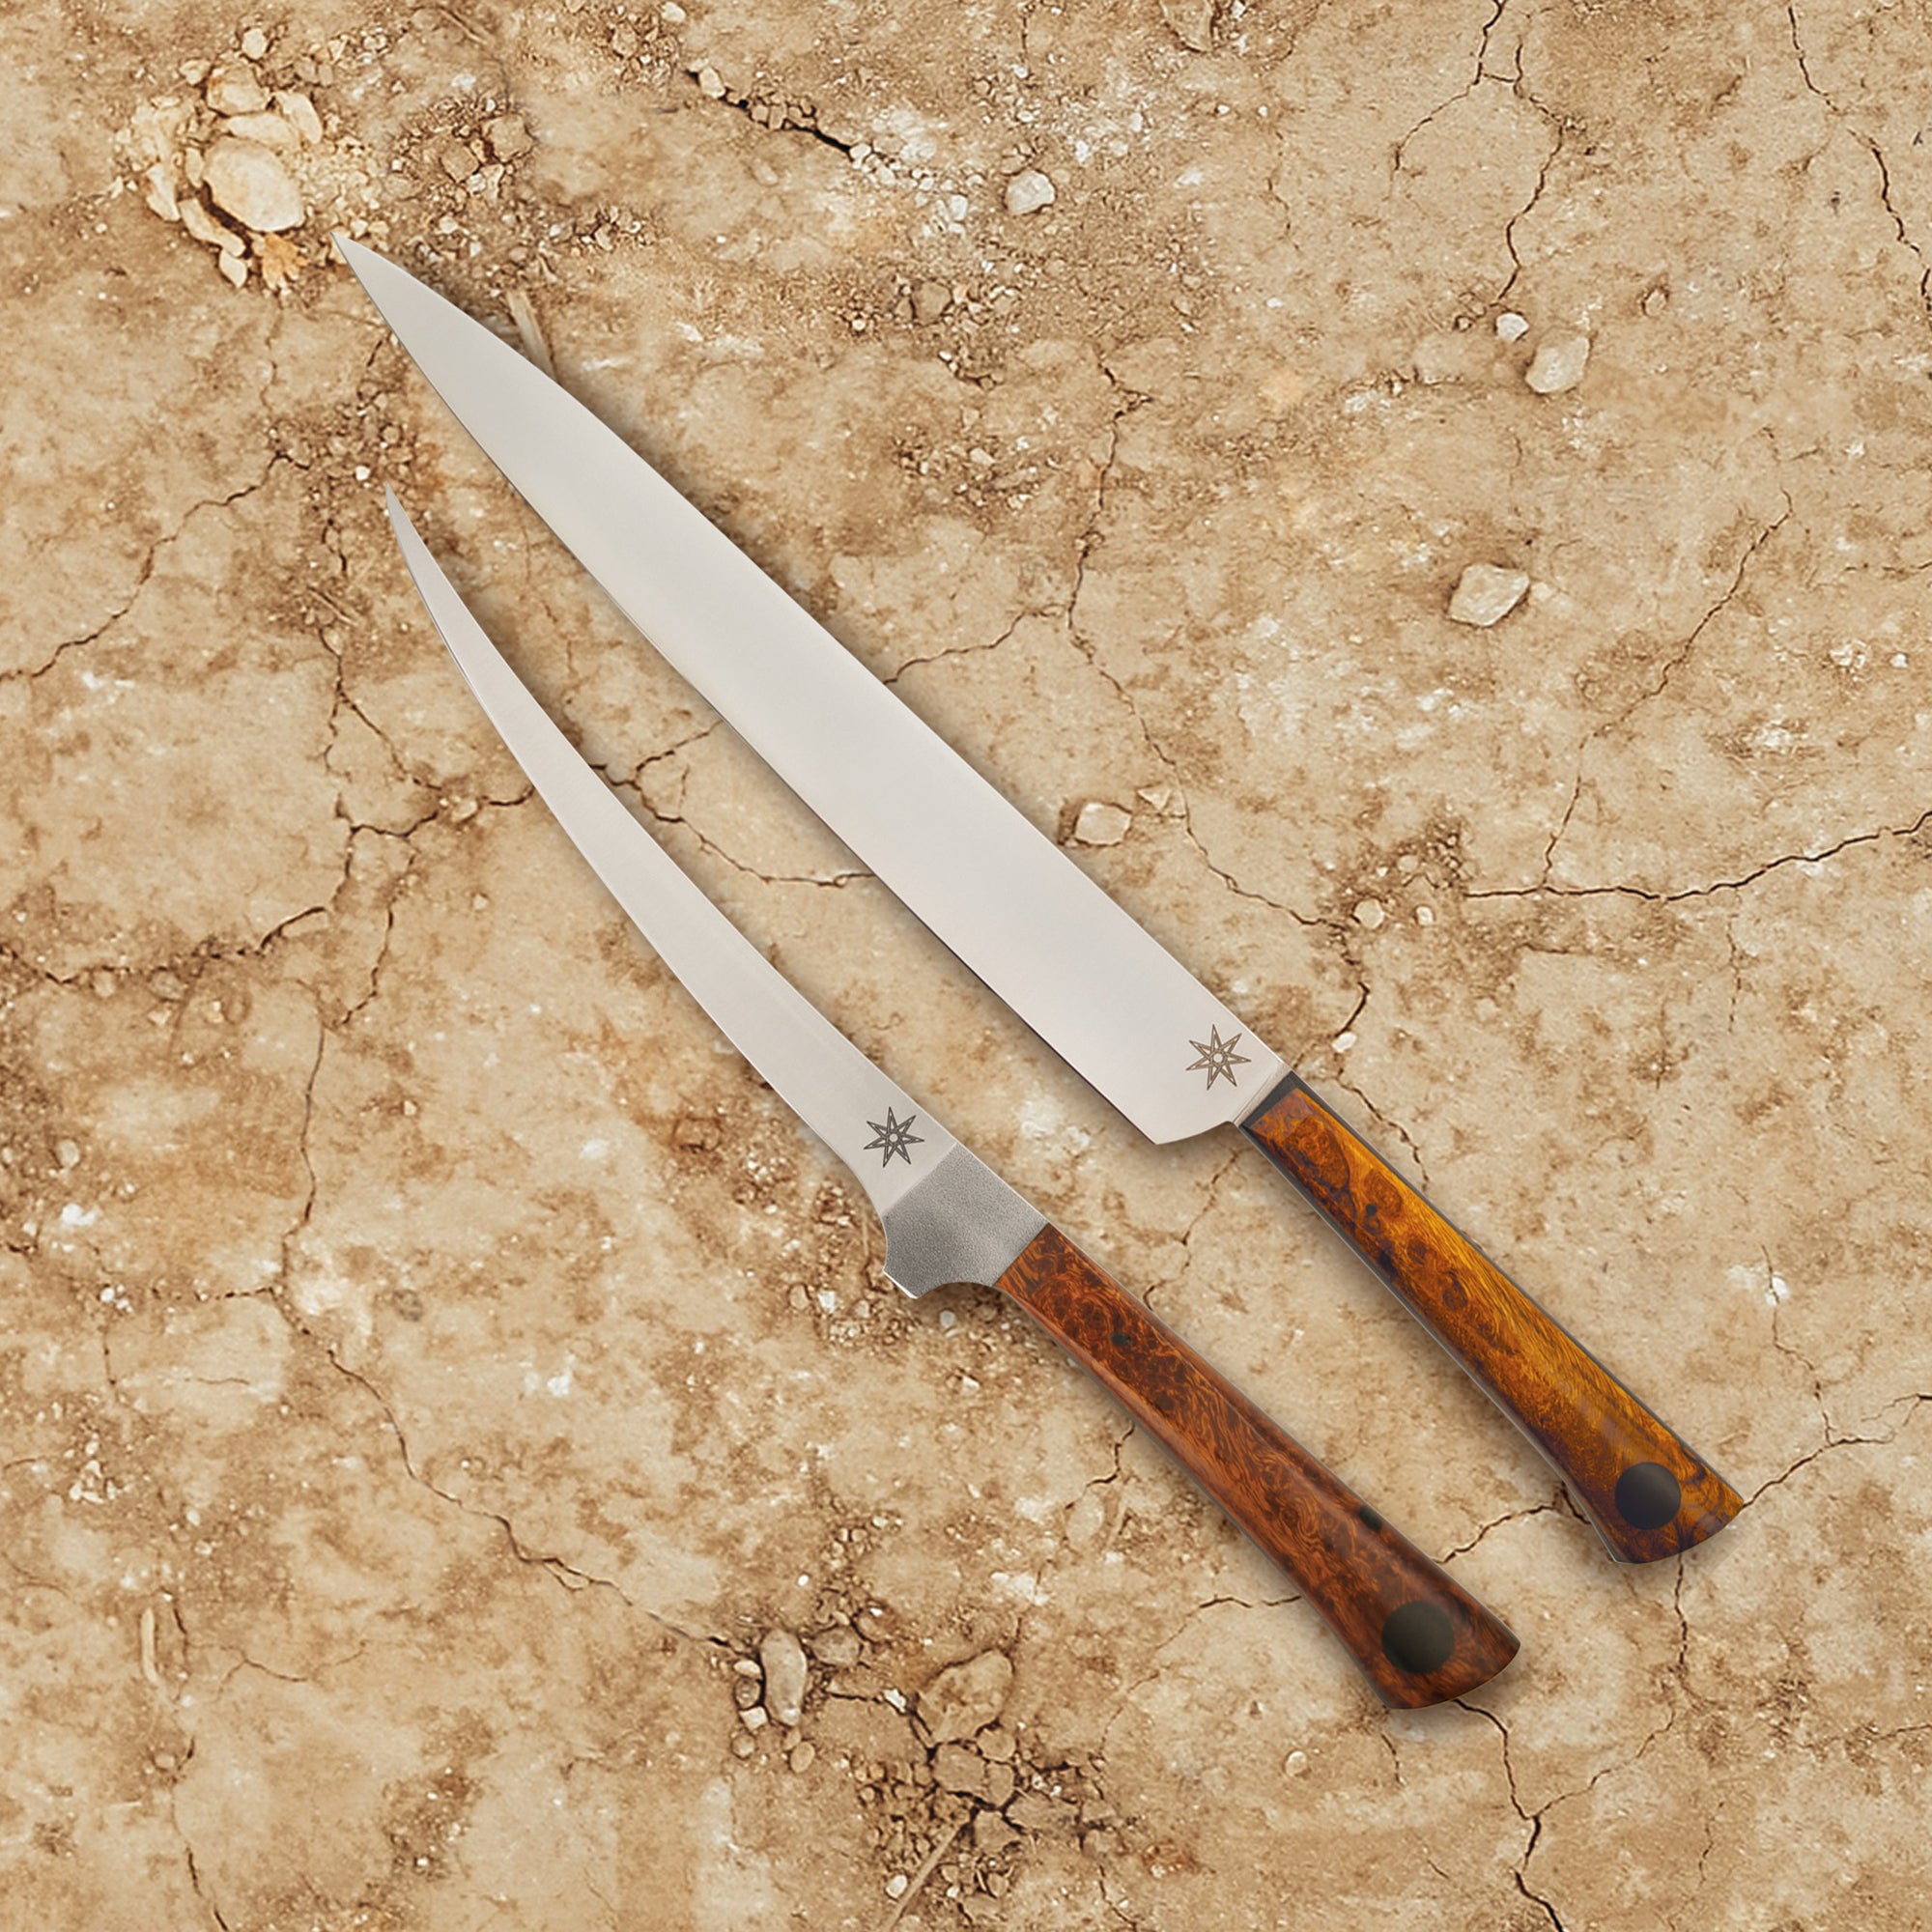 10" stainless steel Slicer and 6" curved boning knives by Town Cutler featuring Olneya Desert Ironwood handle. Sold as set.